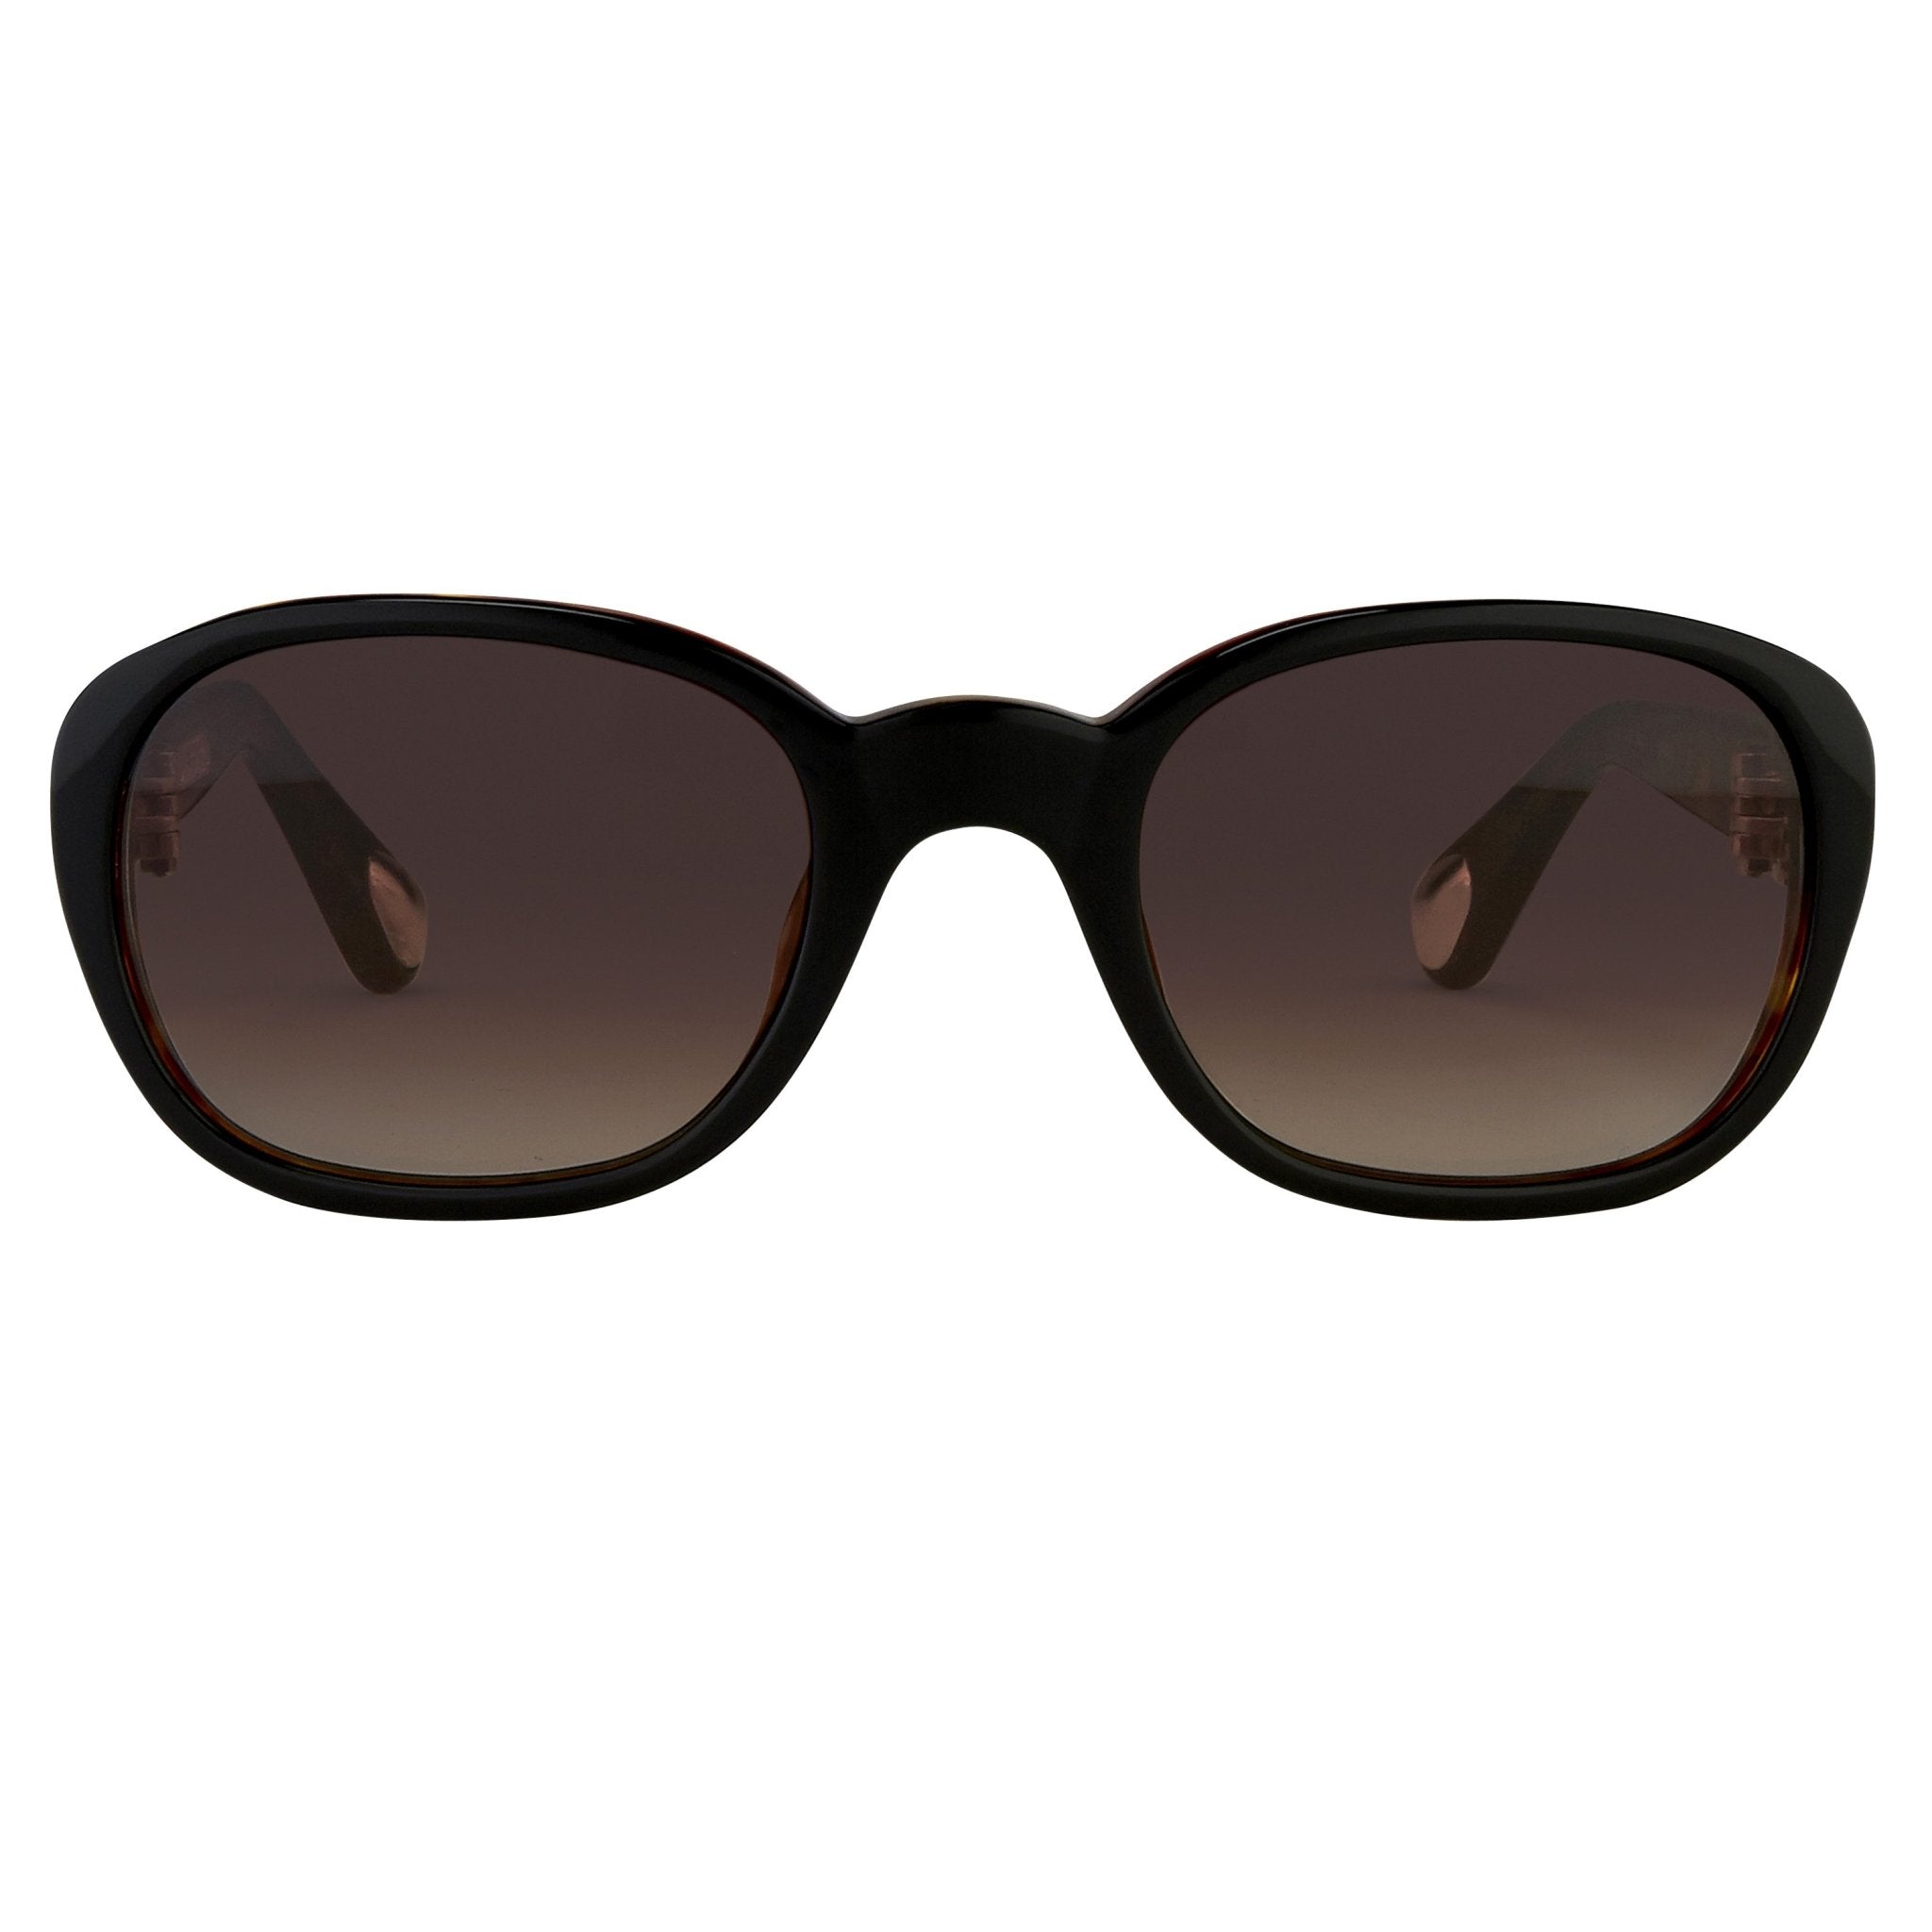 Ann Demeulemeester Sunglasses Oval Black & Tortoise Shell 925 Silver with Brown Graduated Lenses Category 3 AD8C6SUN - Watches & Crystals